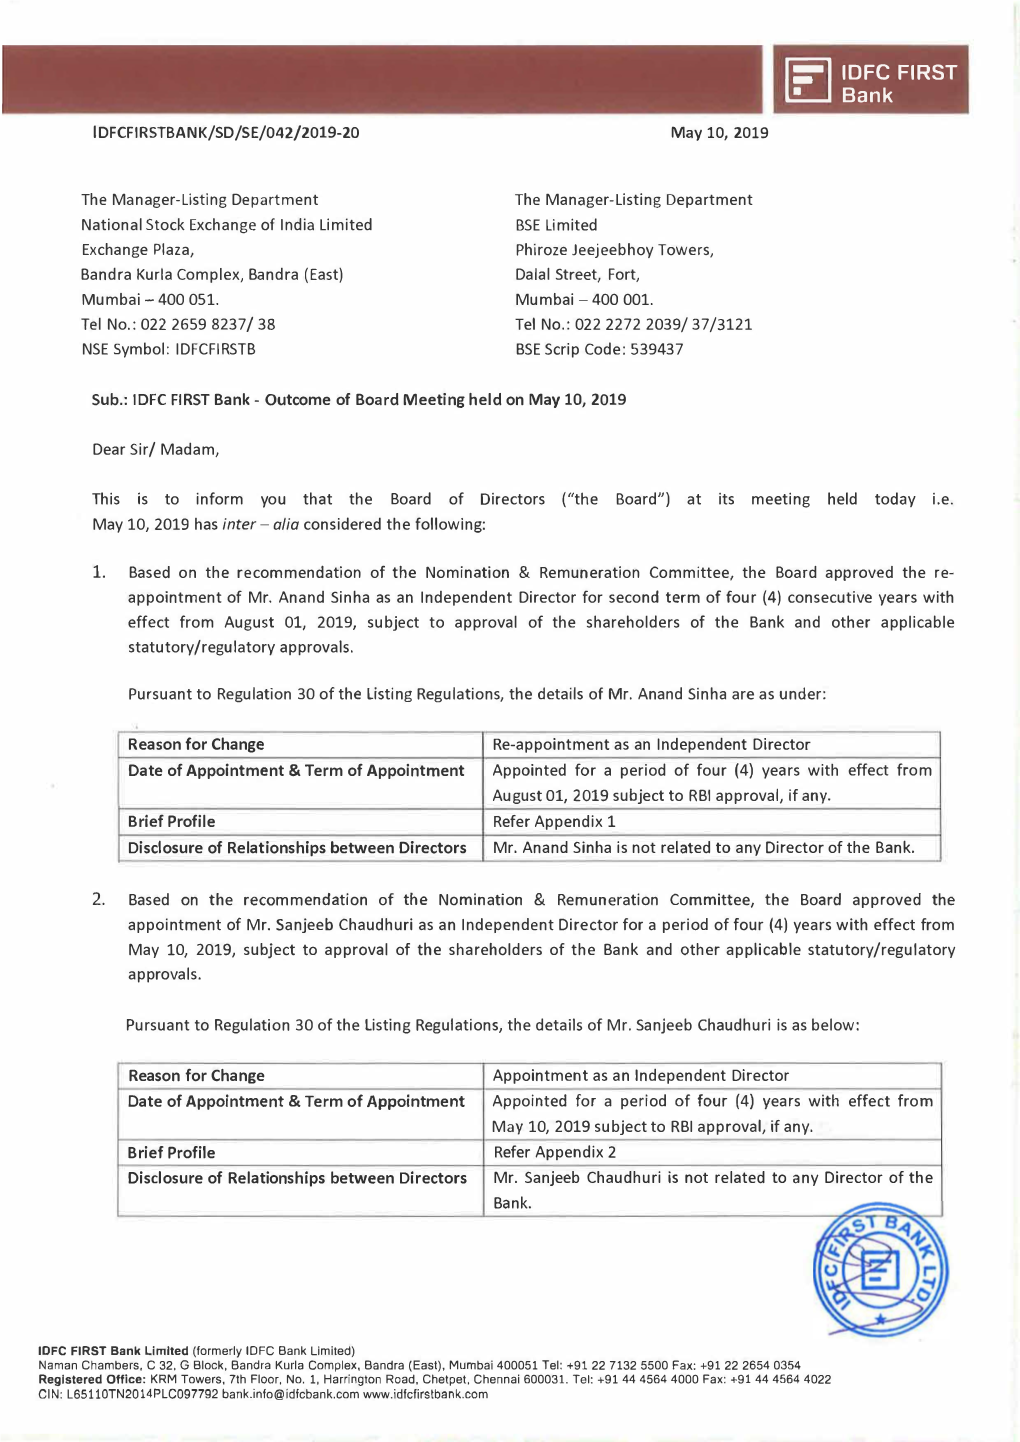 IDFC FIRST Bank - Outcome of Board Meeting Held on May 10, 2019